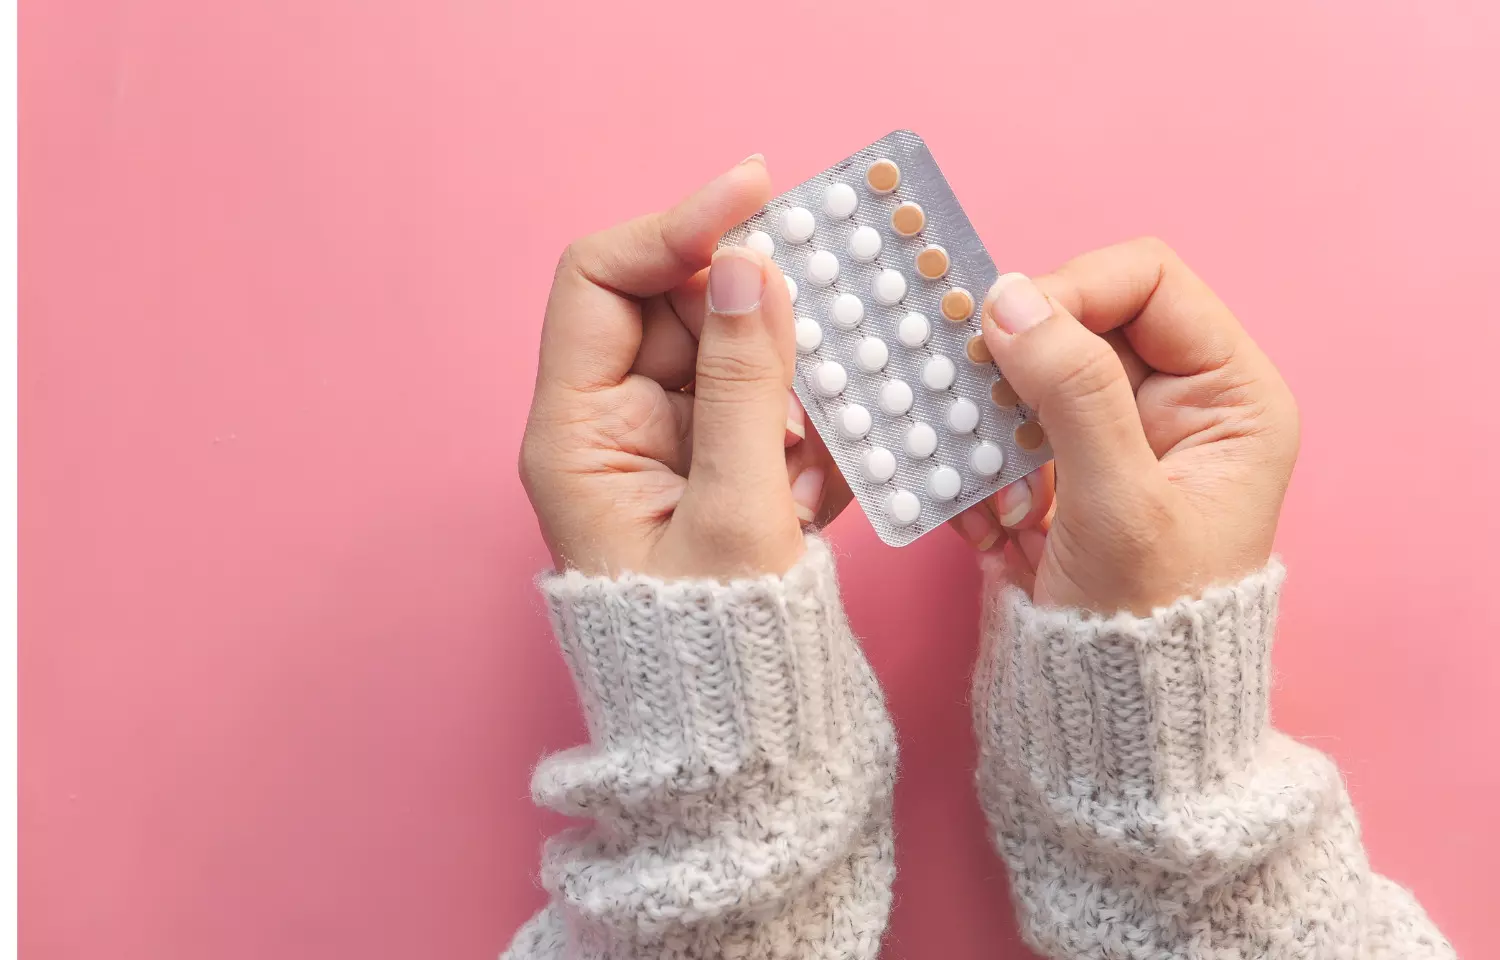 New drug combo promising candidate for on-demand contraceptive pill